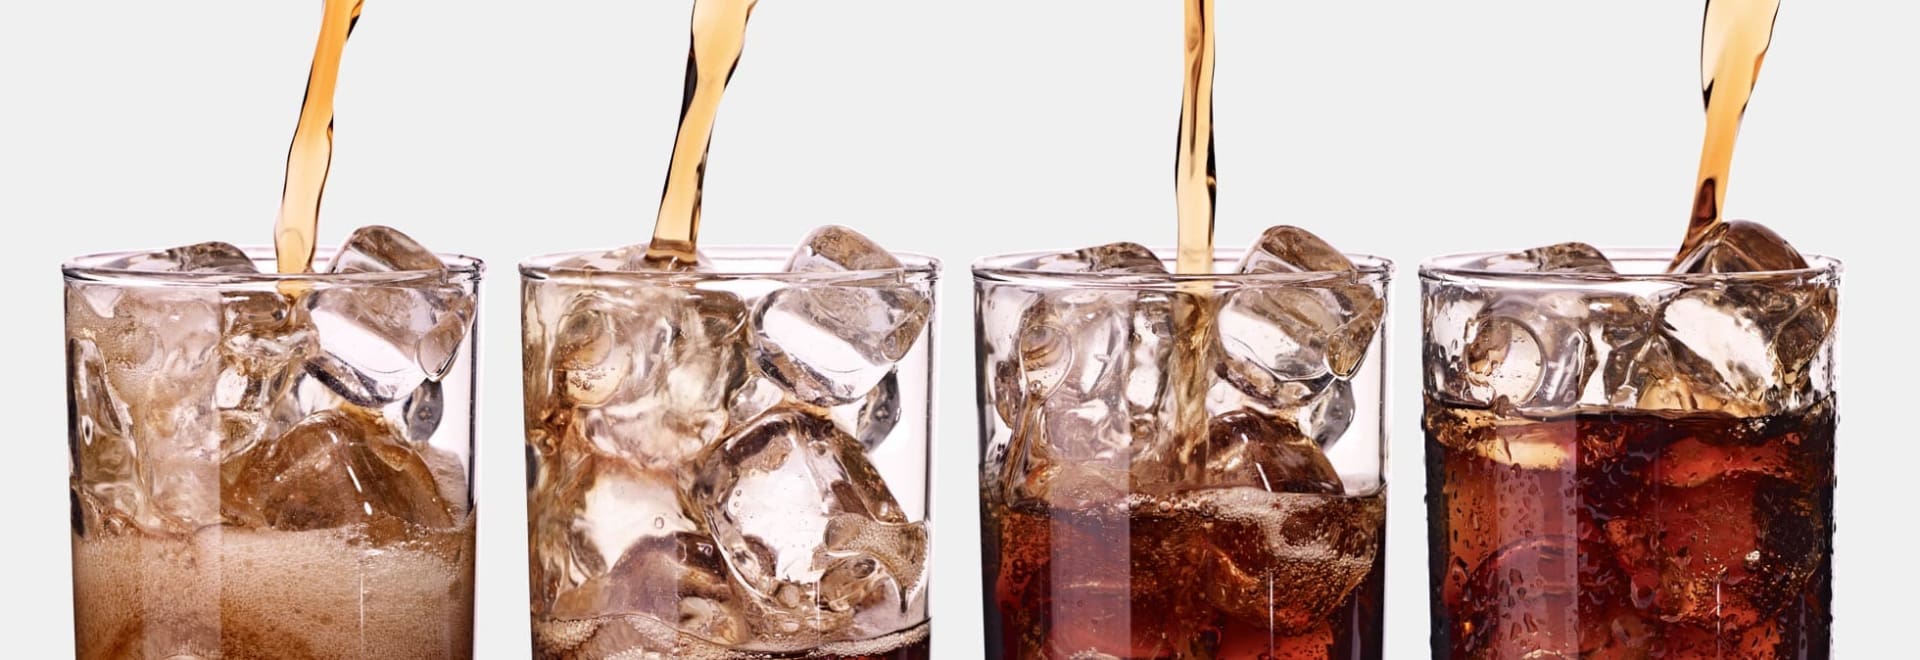 Diet sodas being poured into glasses.